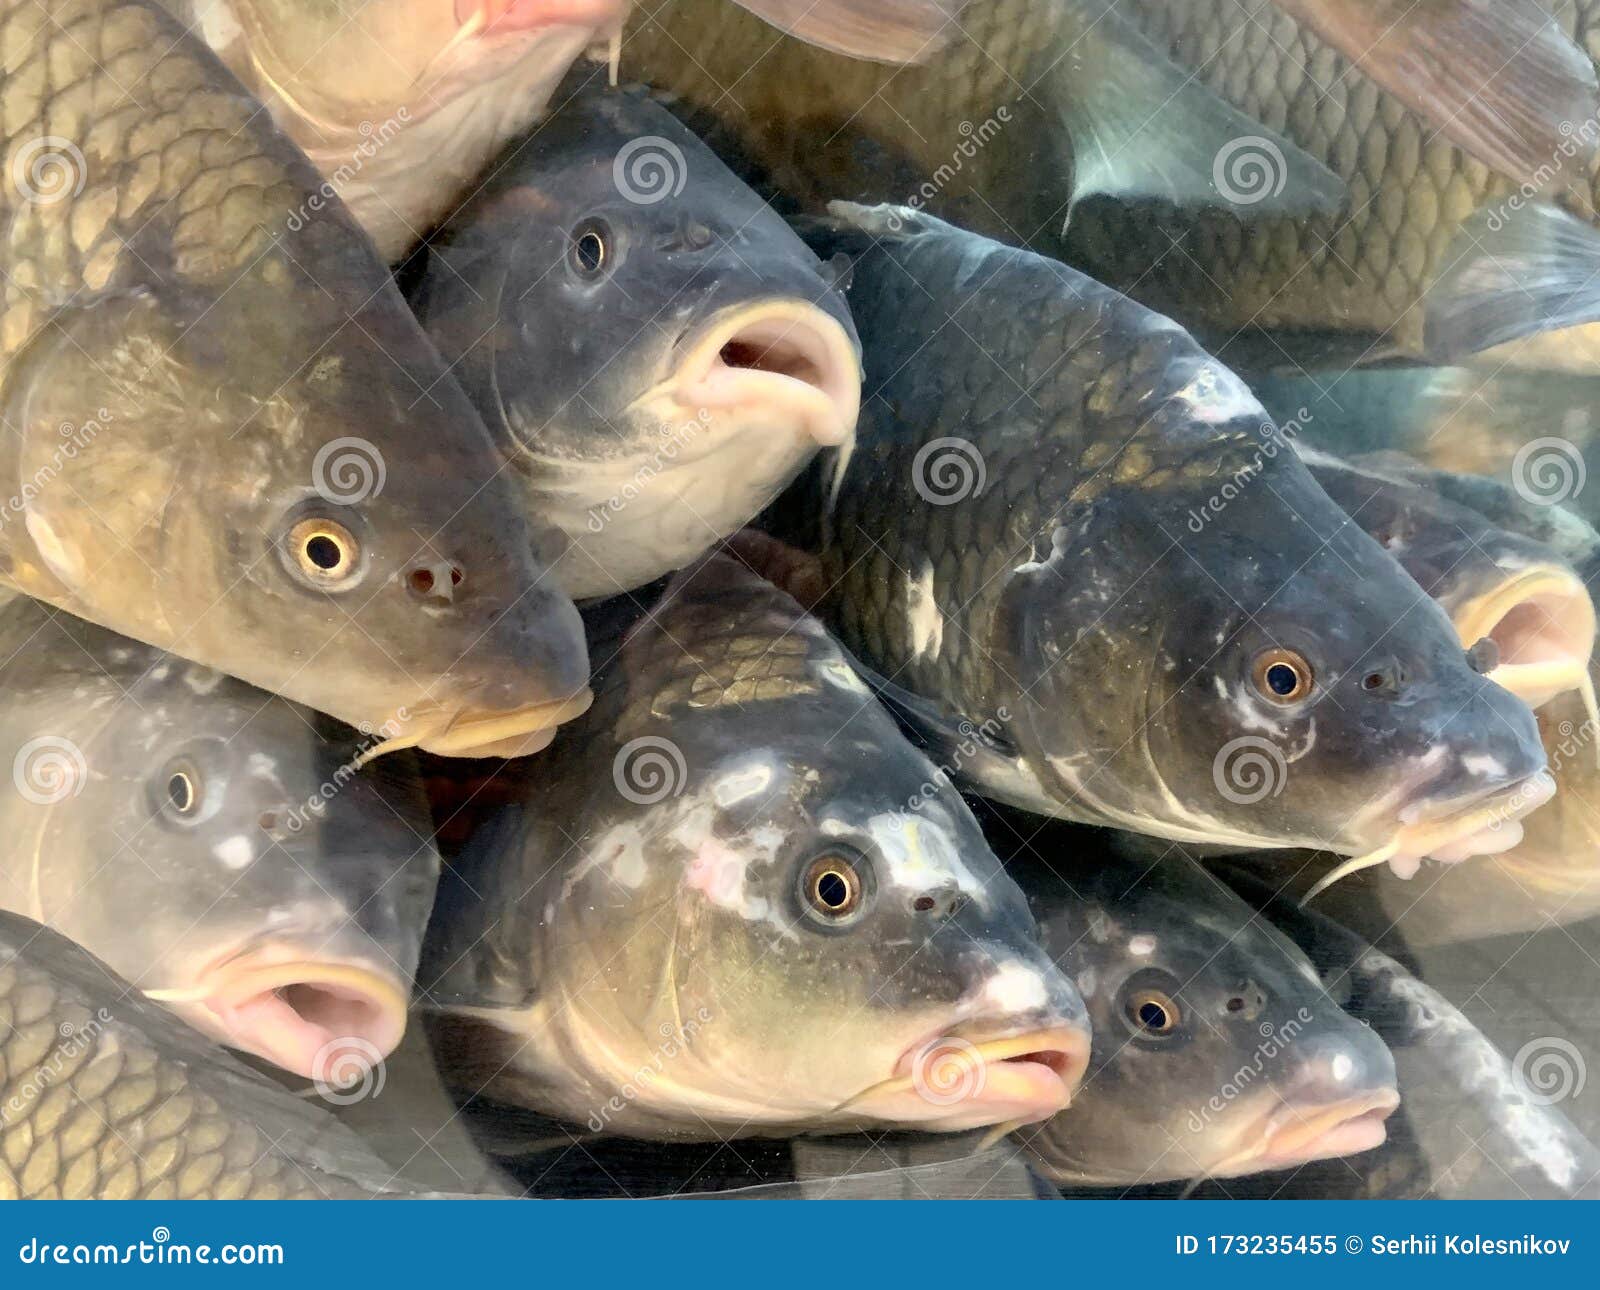 Background Texture: Freshwater Carp and Crucian Carp. Live Fish in